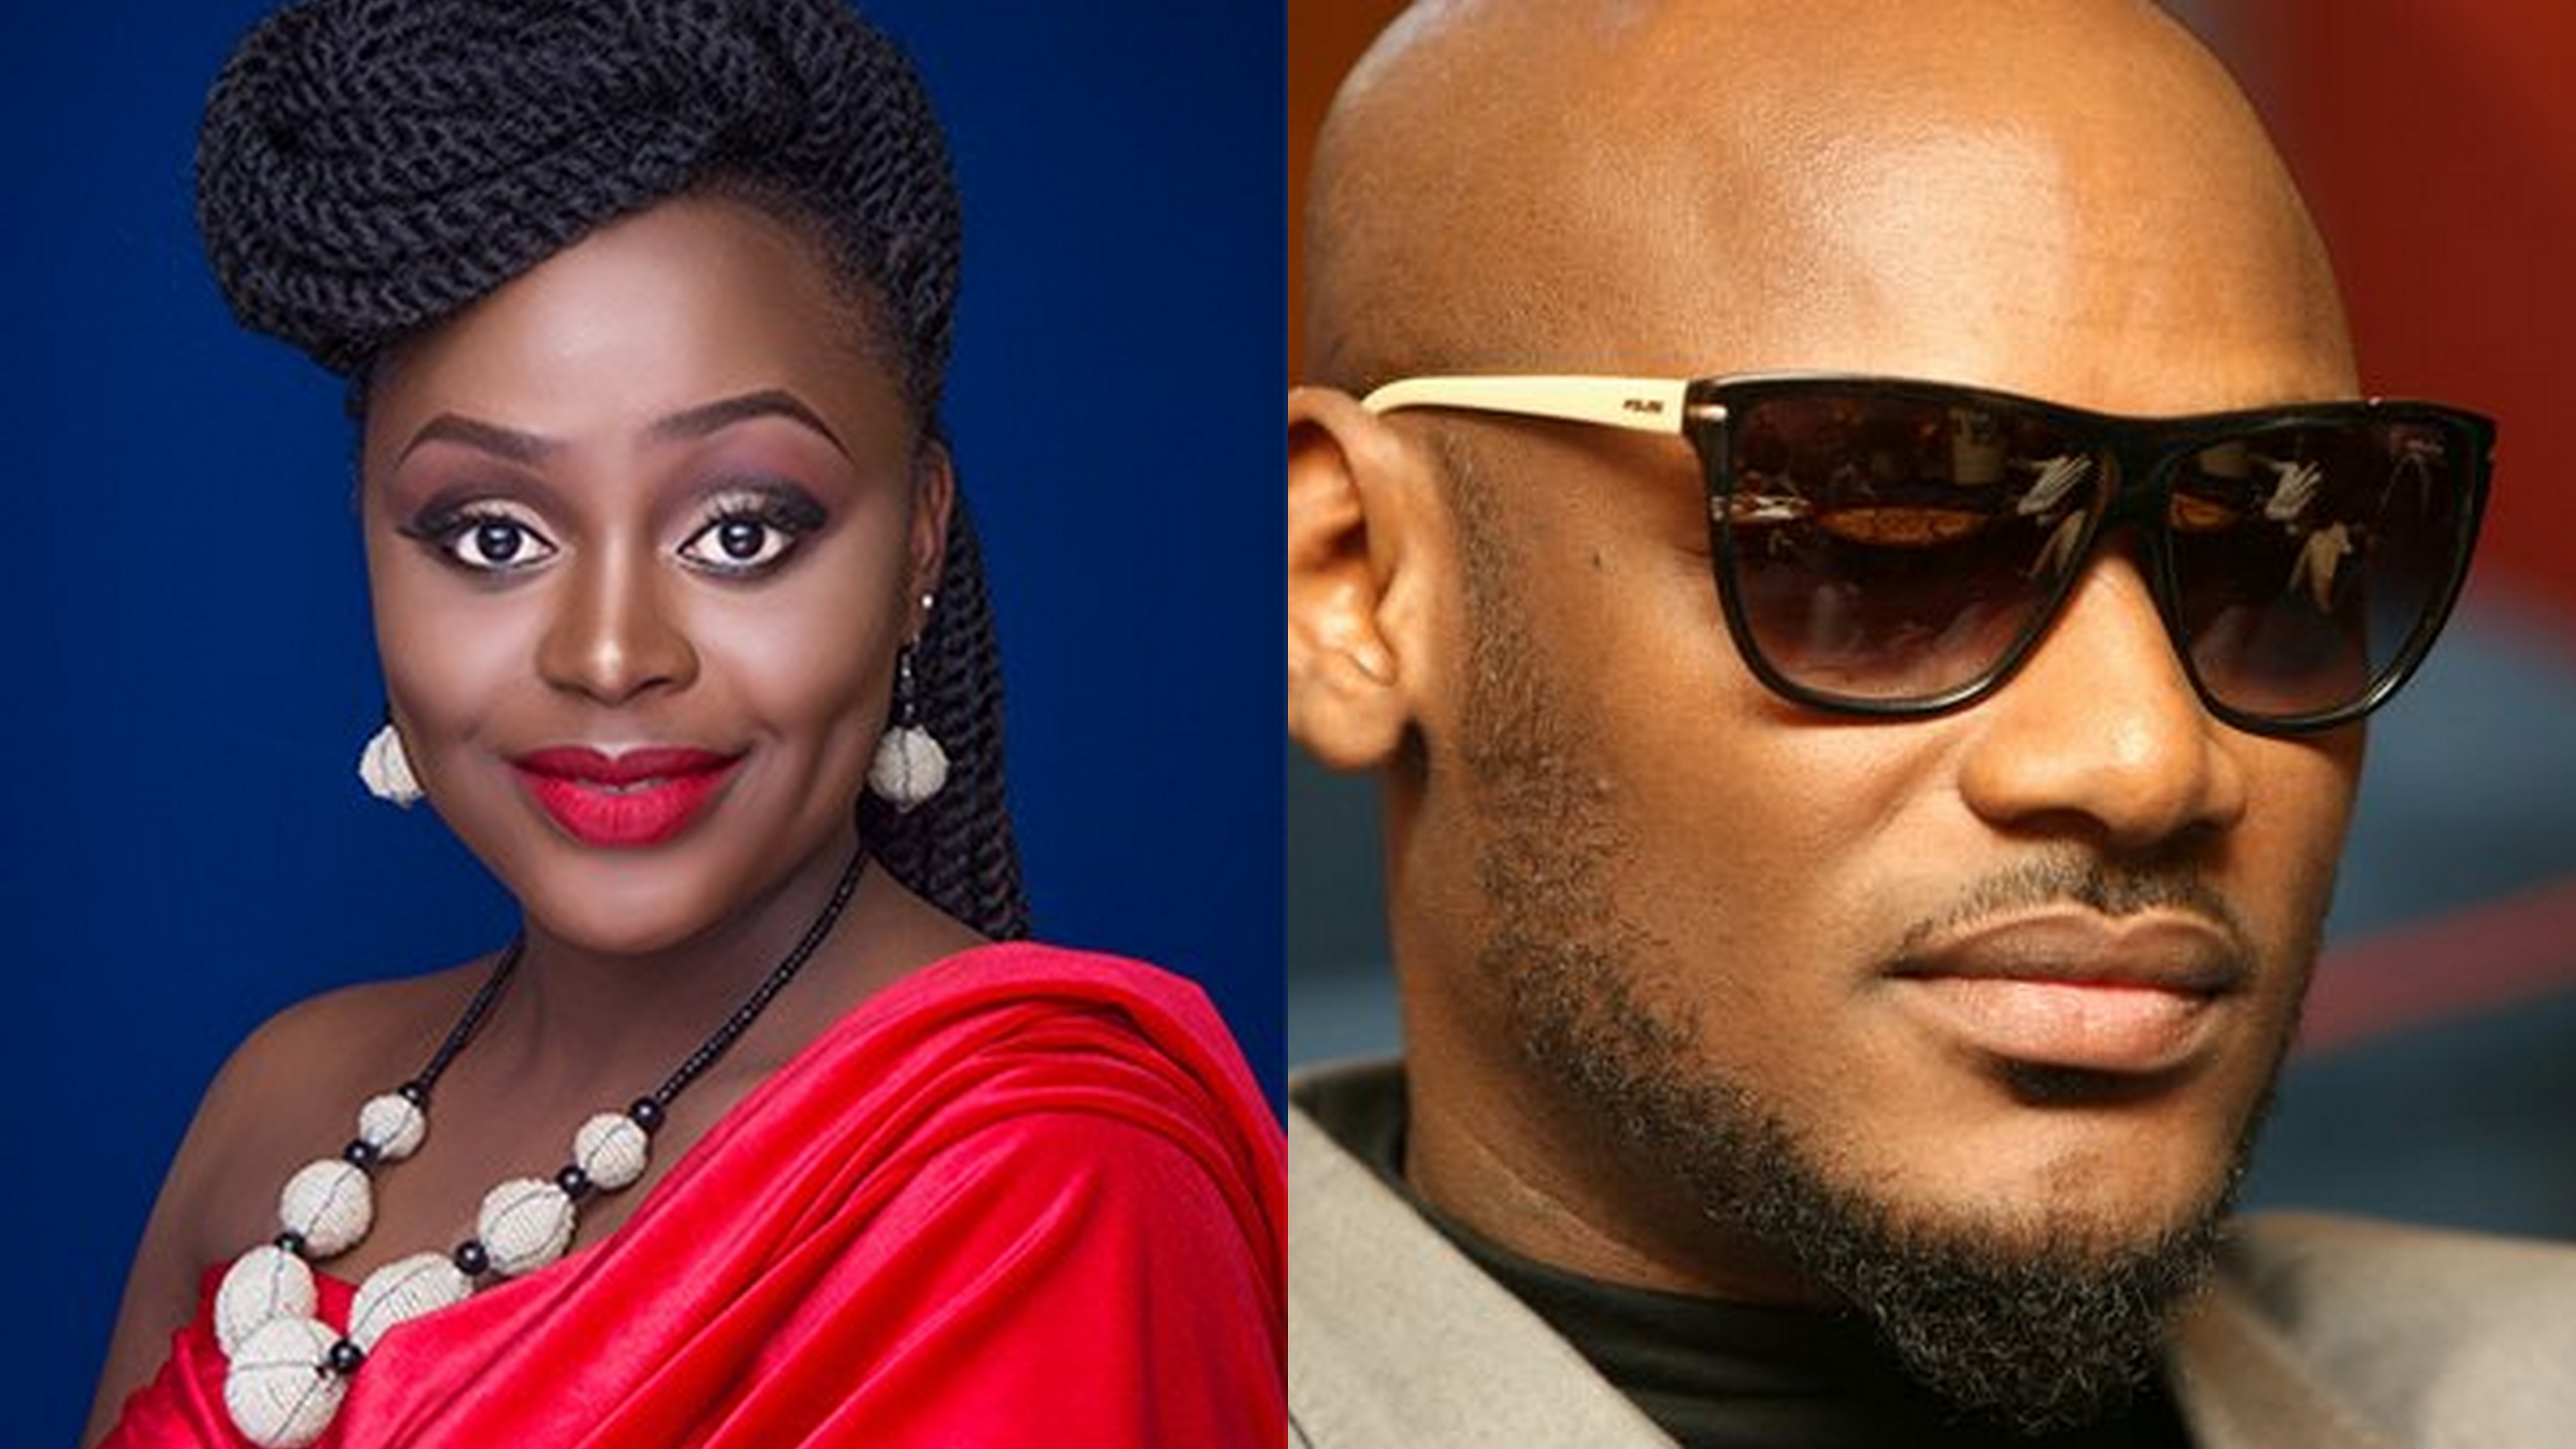 Rema Namakula Invites 2Face to Attend Her Concert - Spur Magazine